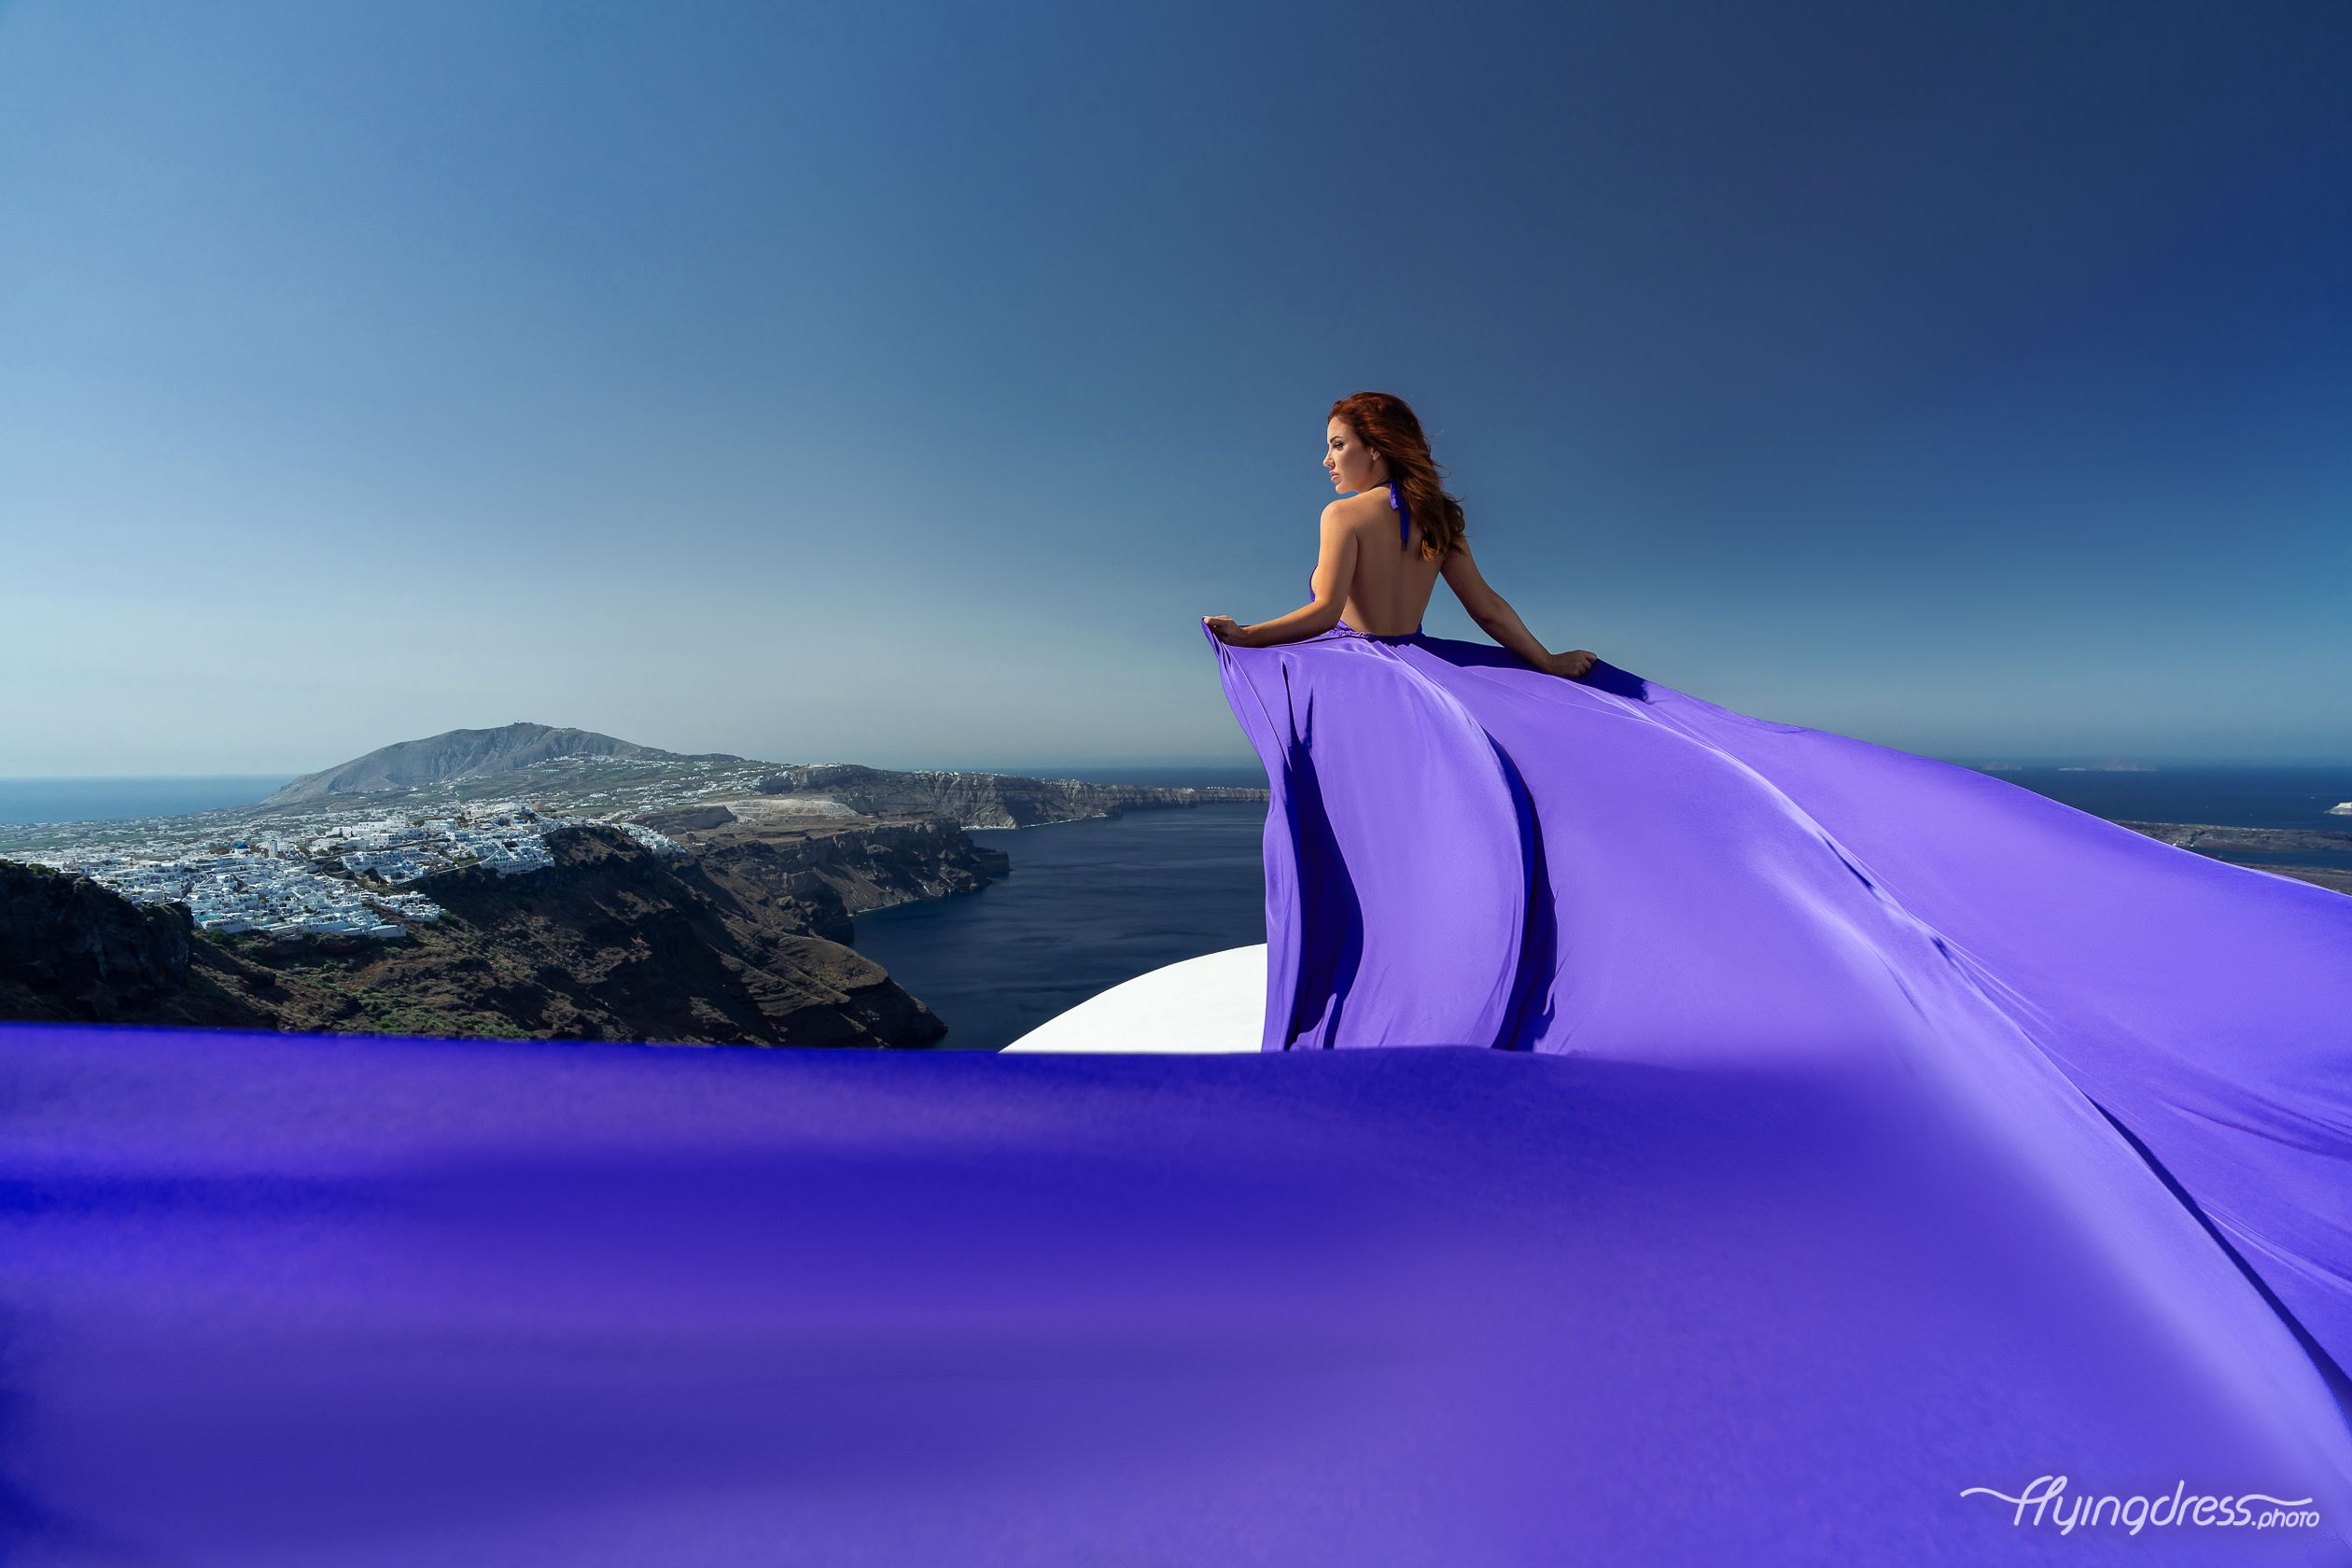 A woman in a flowing purple dress stands on a cliff overlooking a picturesque coastal landscape under a clear blue sky.